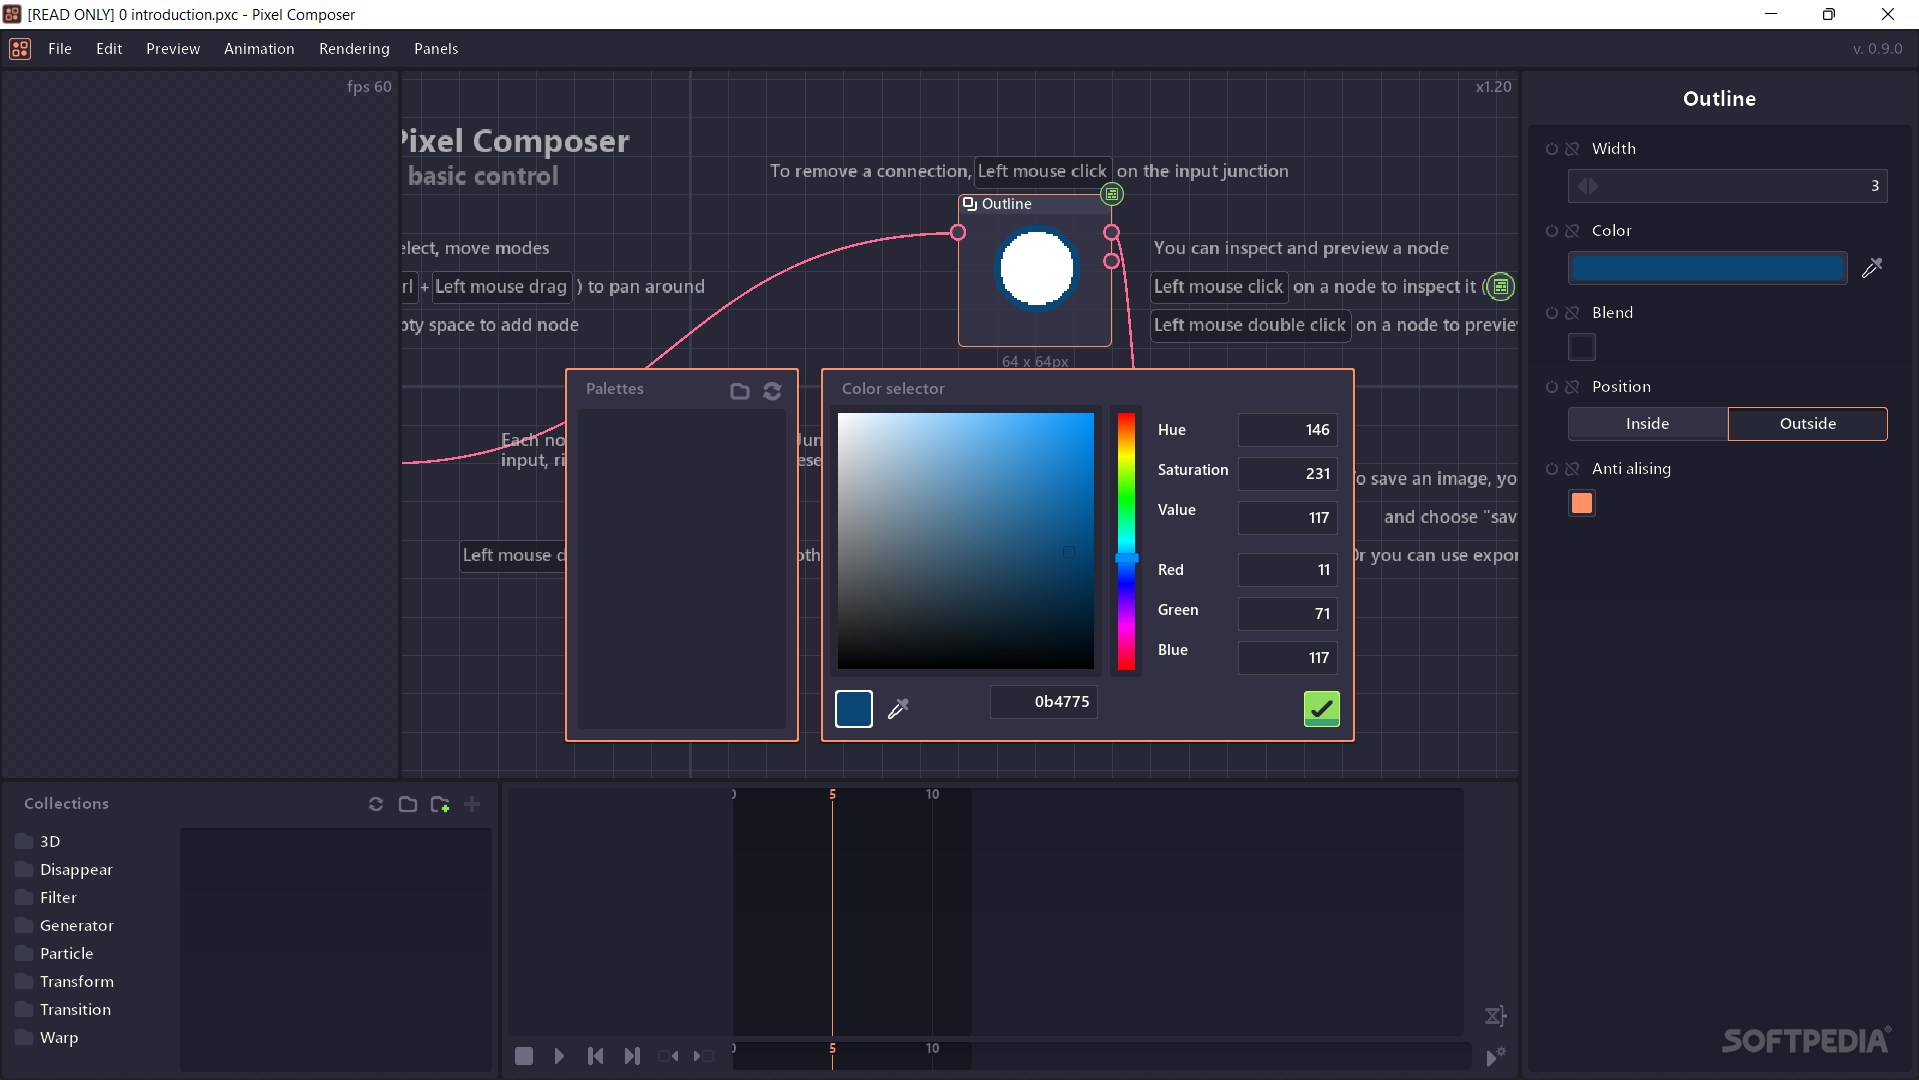 Download Pixel Composer – Download & Review Free